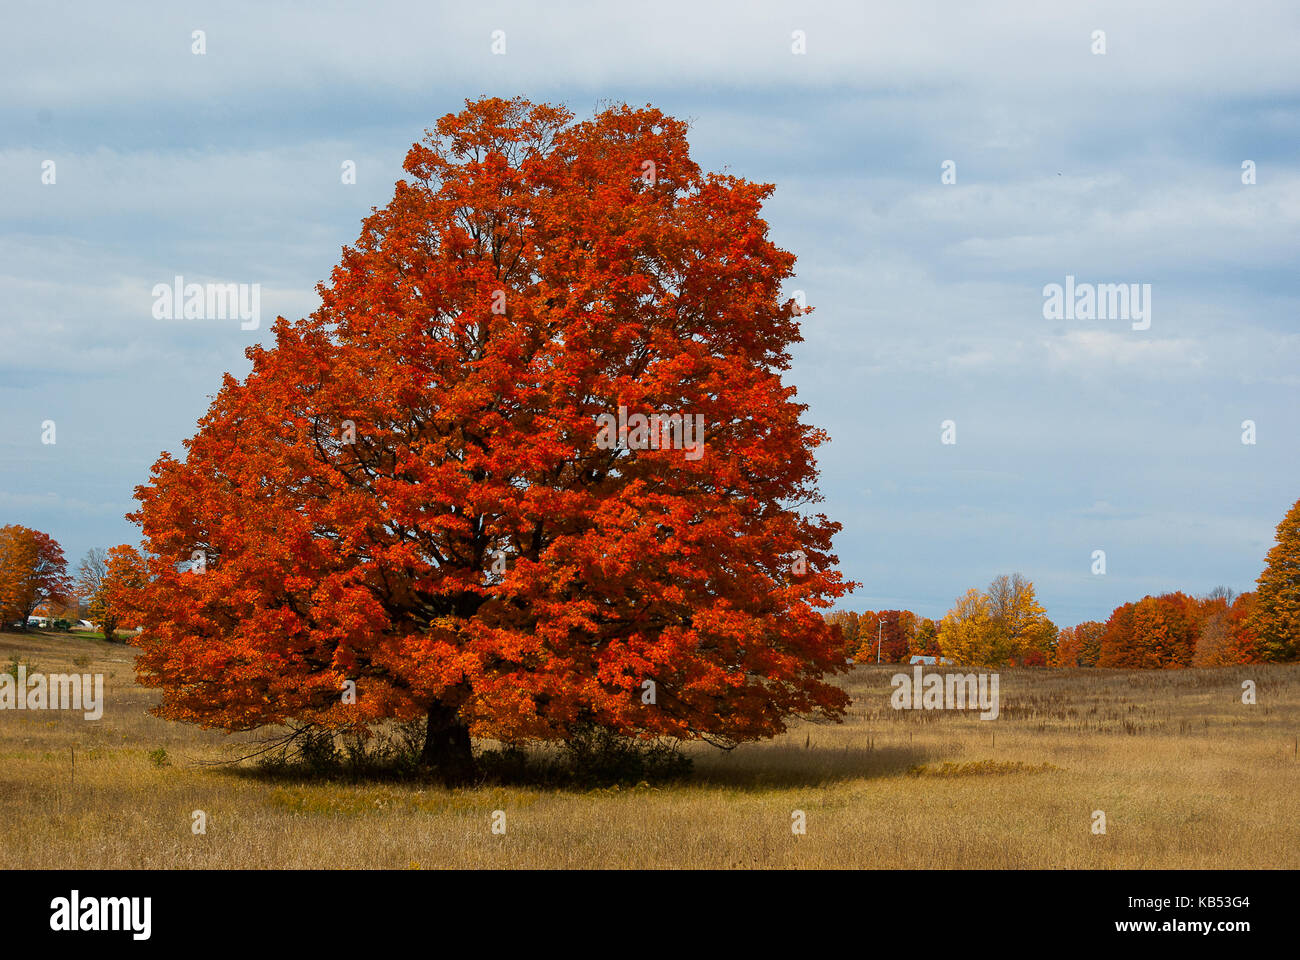 Sugar Maple (Acer saccharum) in fall colors, United States Stock Photo